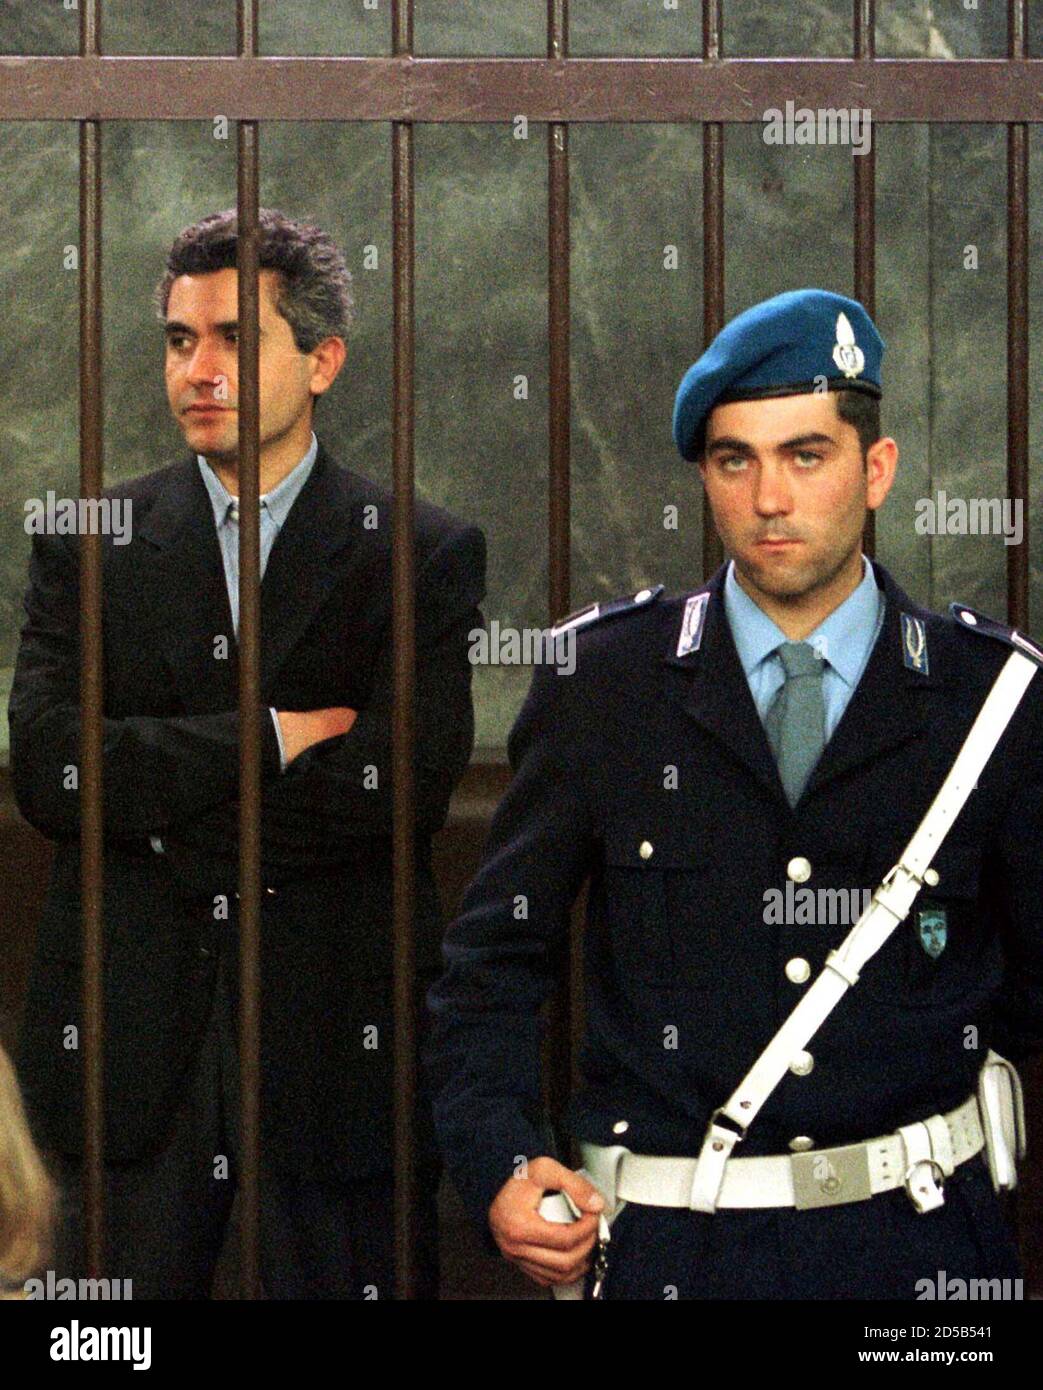 Alleged contract killer Benedetto Ceraulo (L) is guarded at the start of the trial of Patrizia Reggiani, the ex-wife of murdered fashion mogul Maurizio Gucci, May 11. Gucci, the last grandson of Guccio Gucci, the founder of the world famous fashion empire, was gunned down in central Milan in March 1995 by a contract killer. The trial was immediately adjourned on its opening day after defence lawyers joined a national strike by Italy's legal profession. Stock Photo